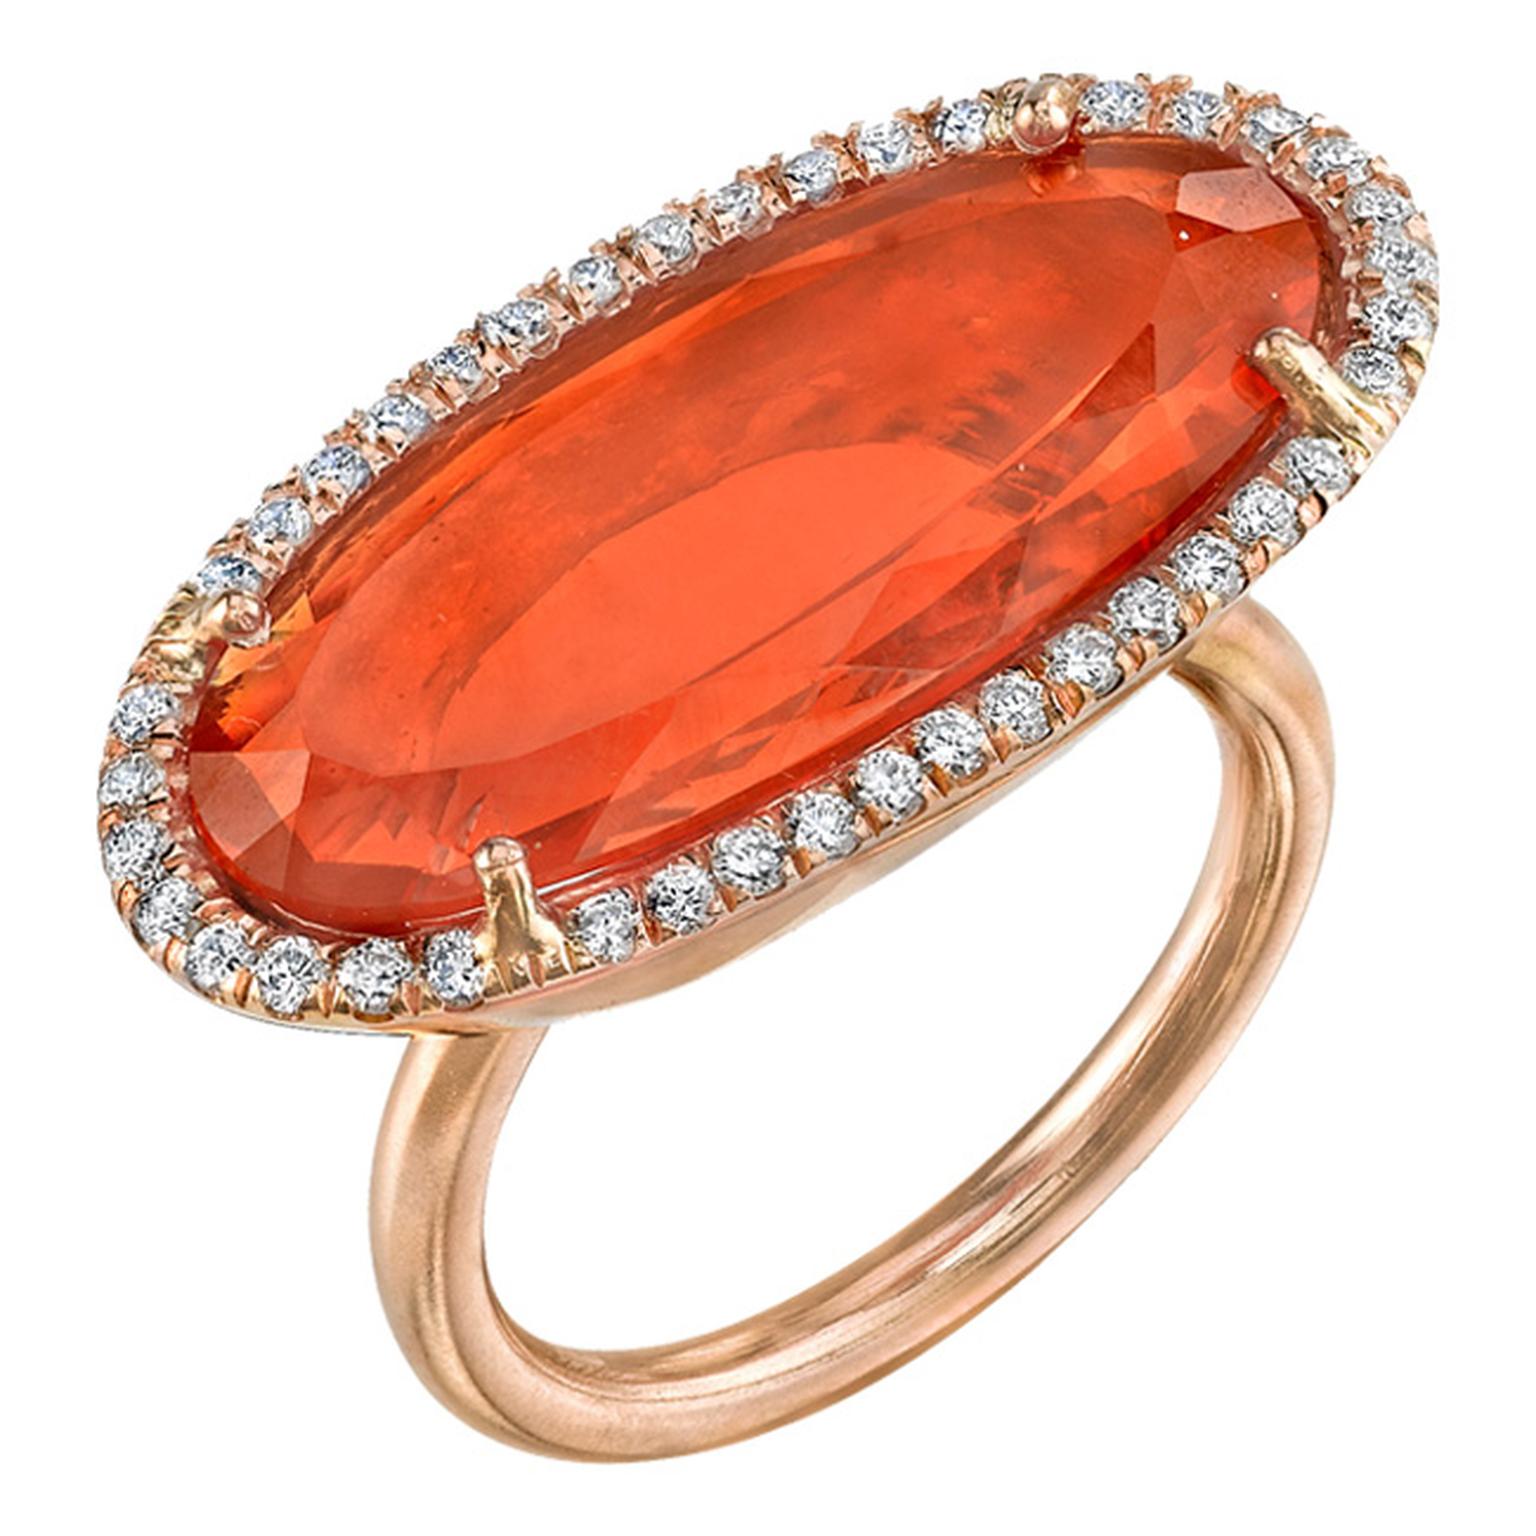 Irene Neuwirth ring in rose gold with a Mexican fire opal surrounded by diamond pave_20131227_Main